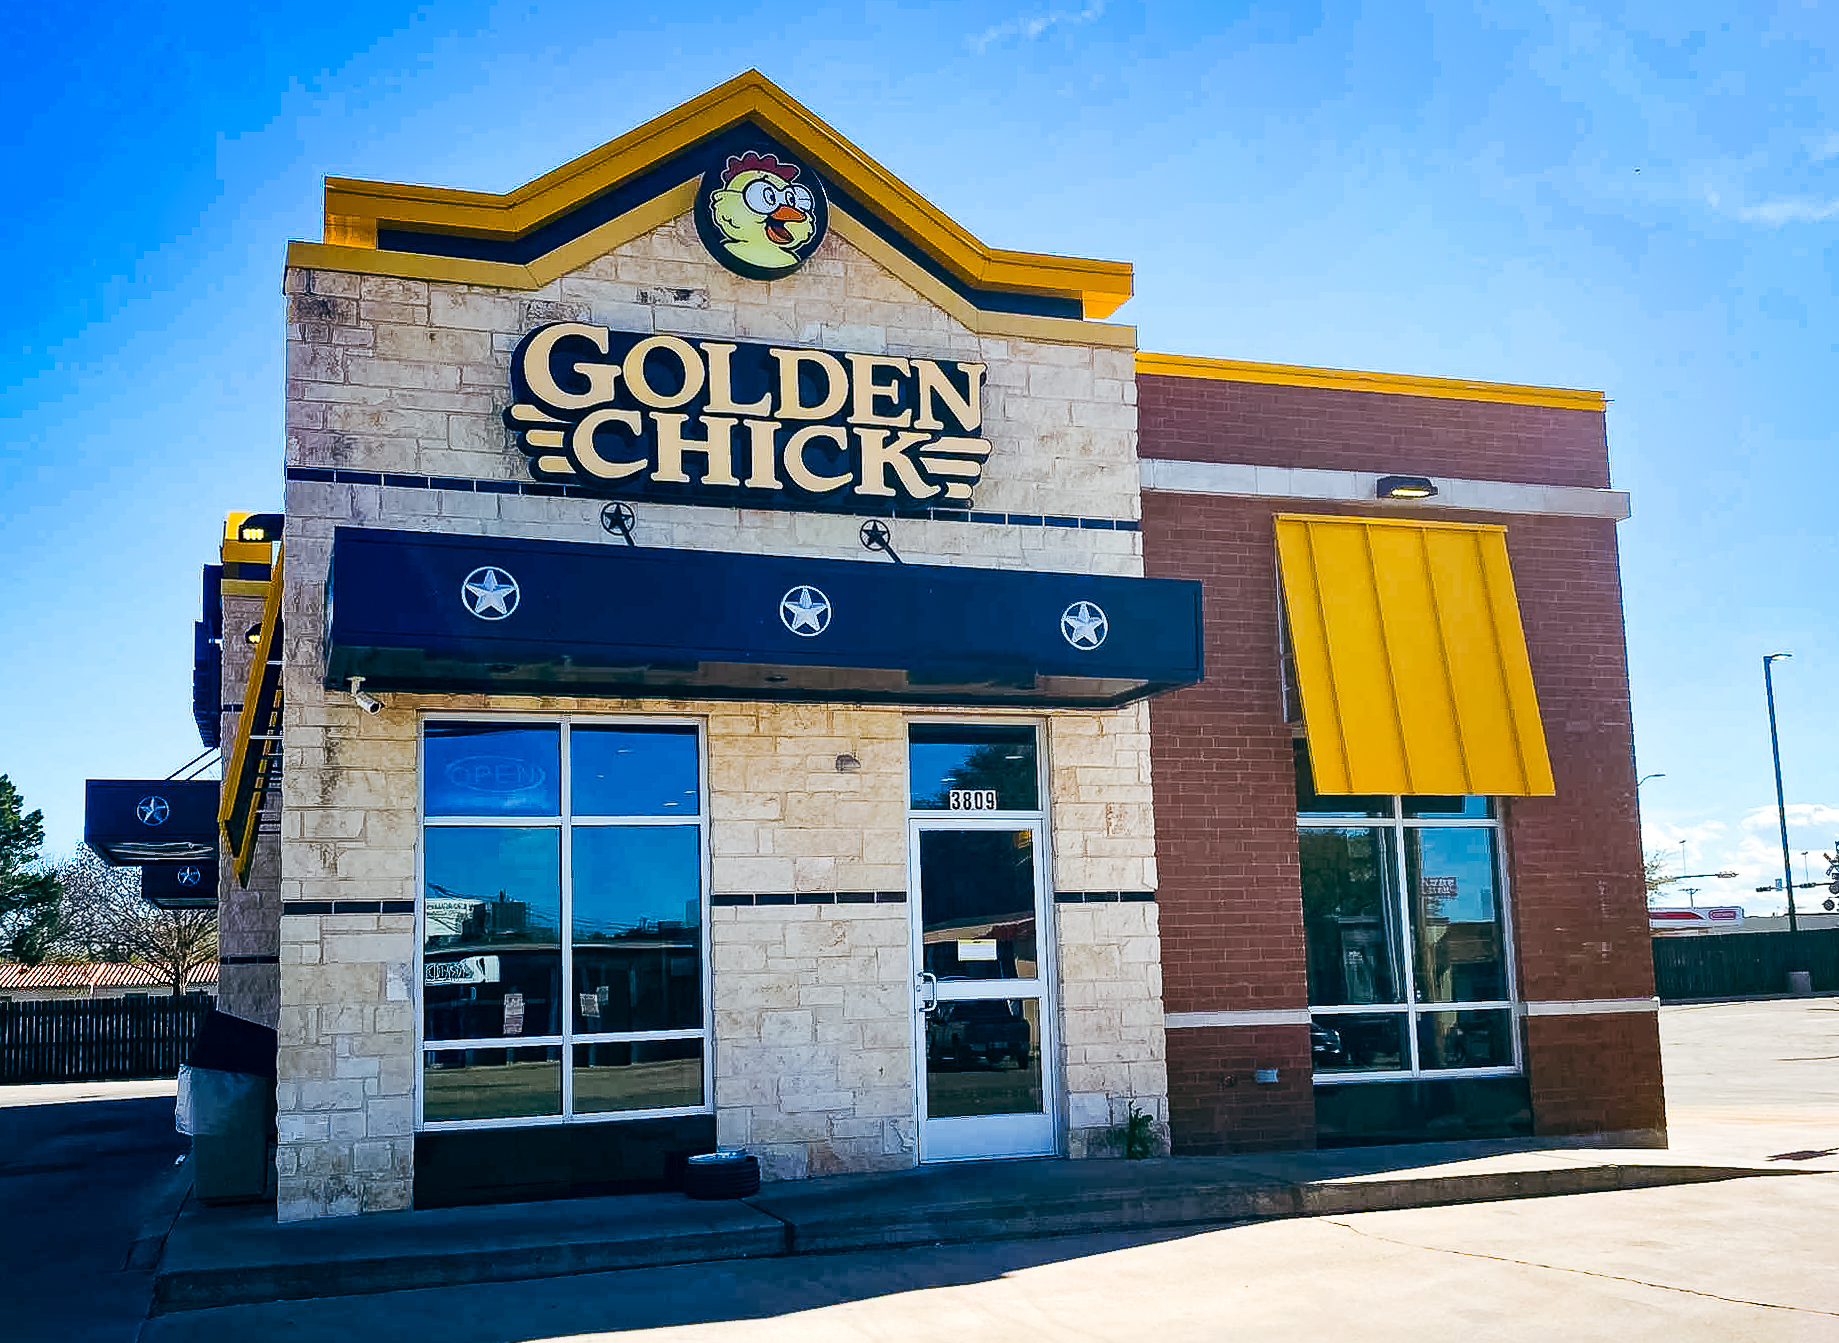 Golden Chick storefront.  Your local Golden Chick fast food restaurant in Abilene, Texas